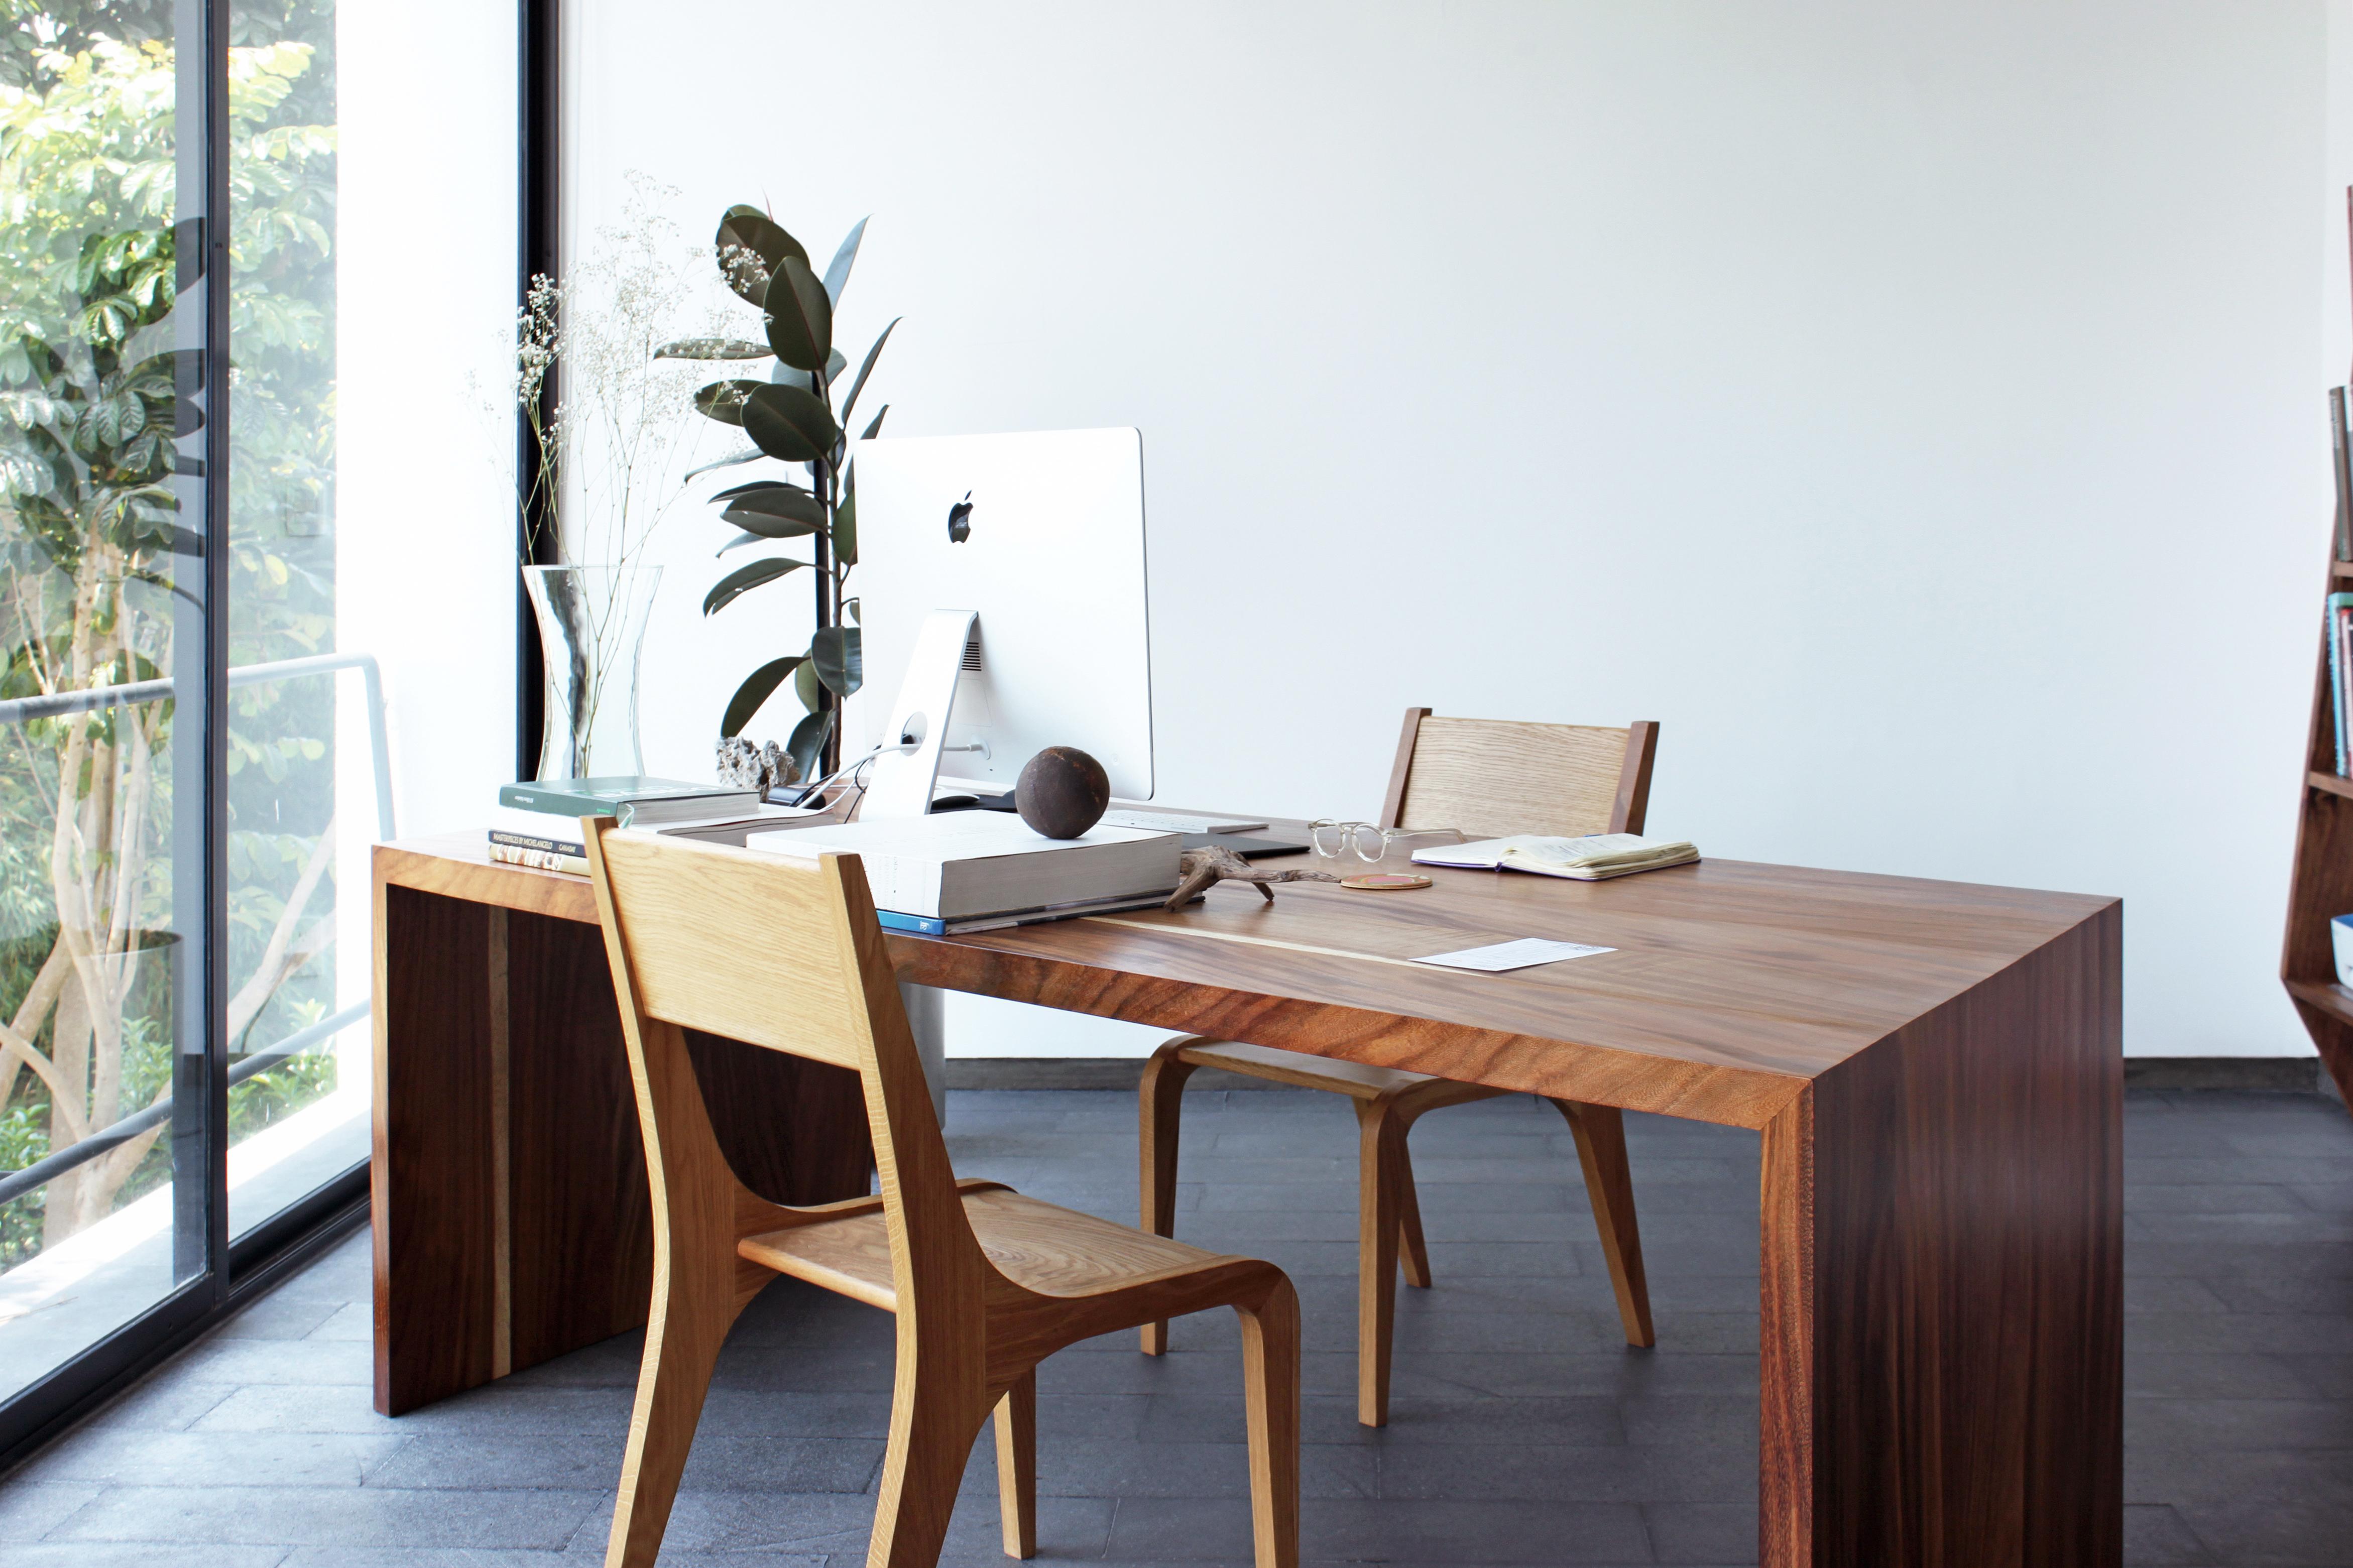 Modern La Desviada Tall Table and Desk by Maria Beckmann, Represented by Tuleste Factor